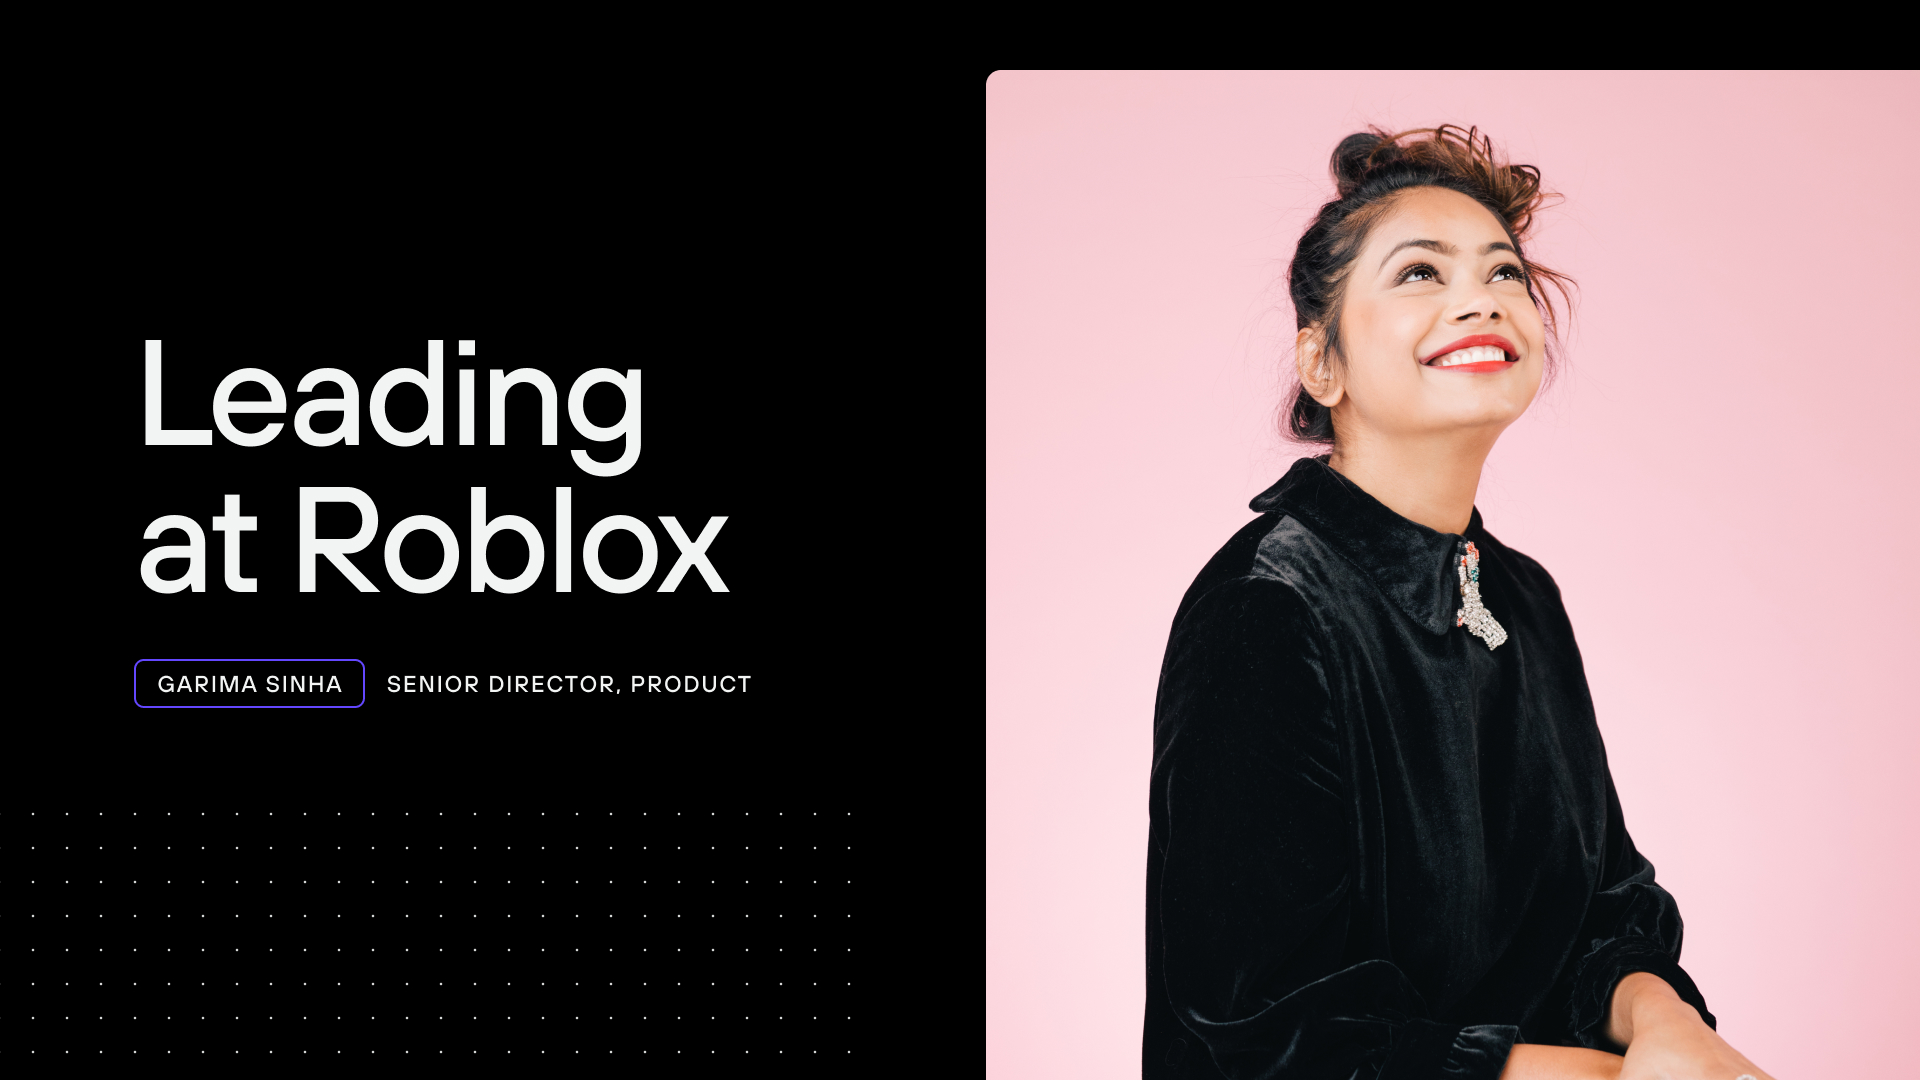 Leading at Roblox with Garima Sinha